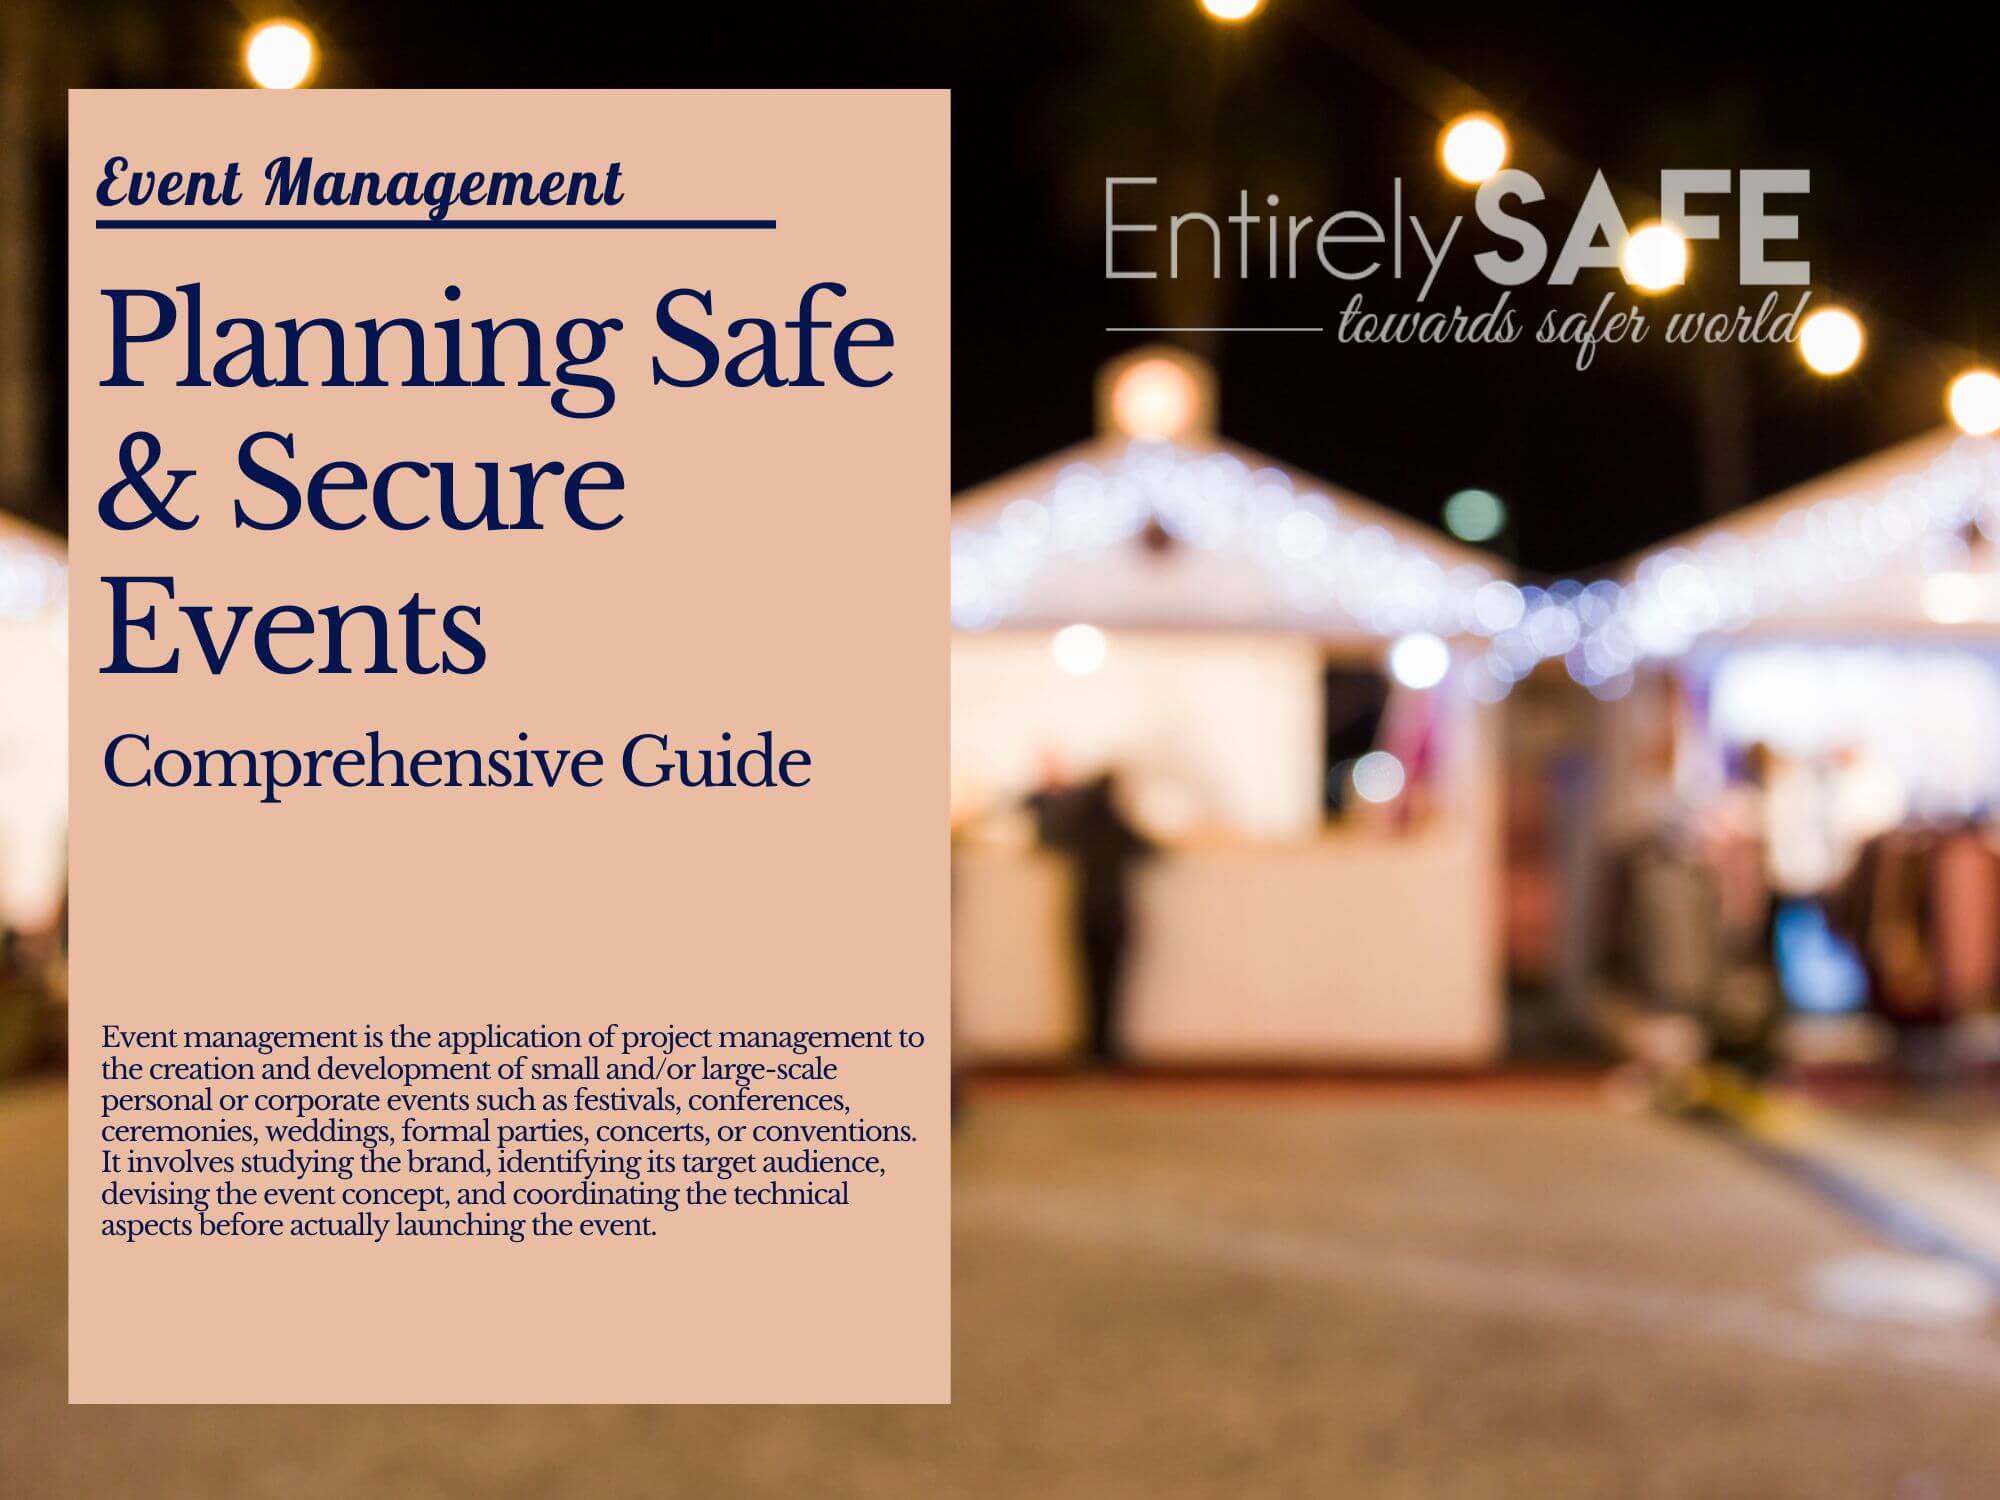 Comprehensive Guide to Planning Safe and Secure Events